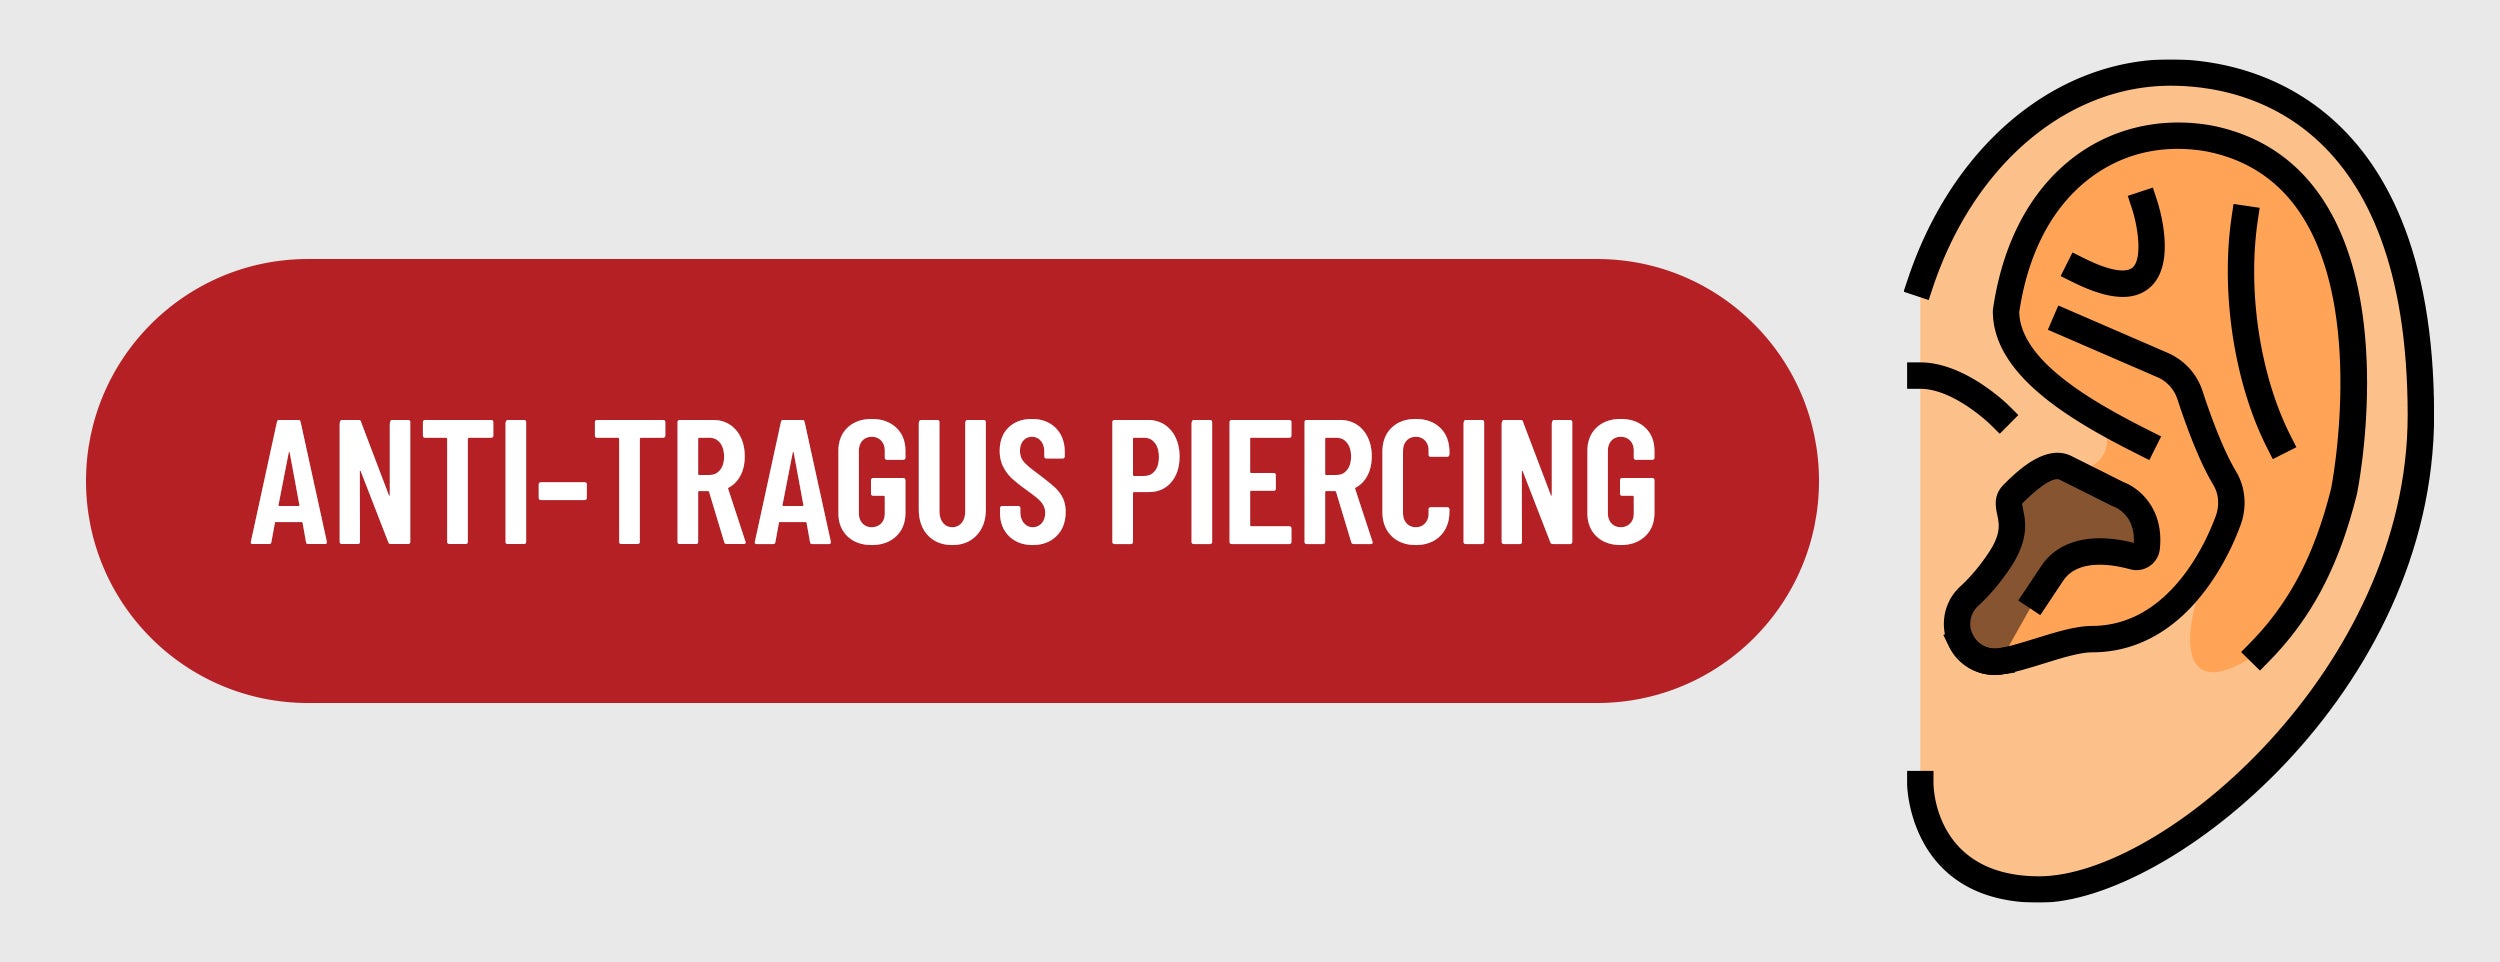 Anti-Tragus Piercing Is Moderately Painful